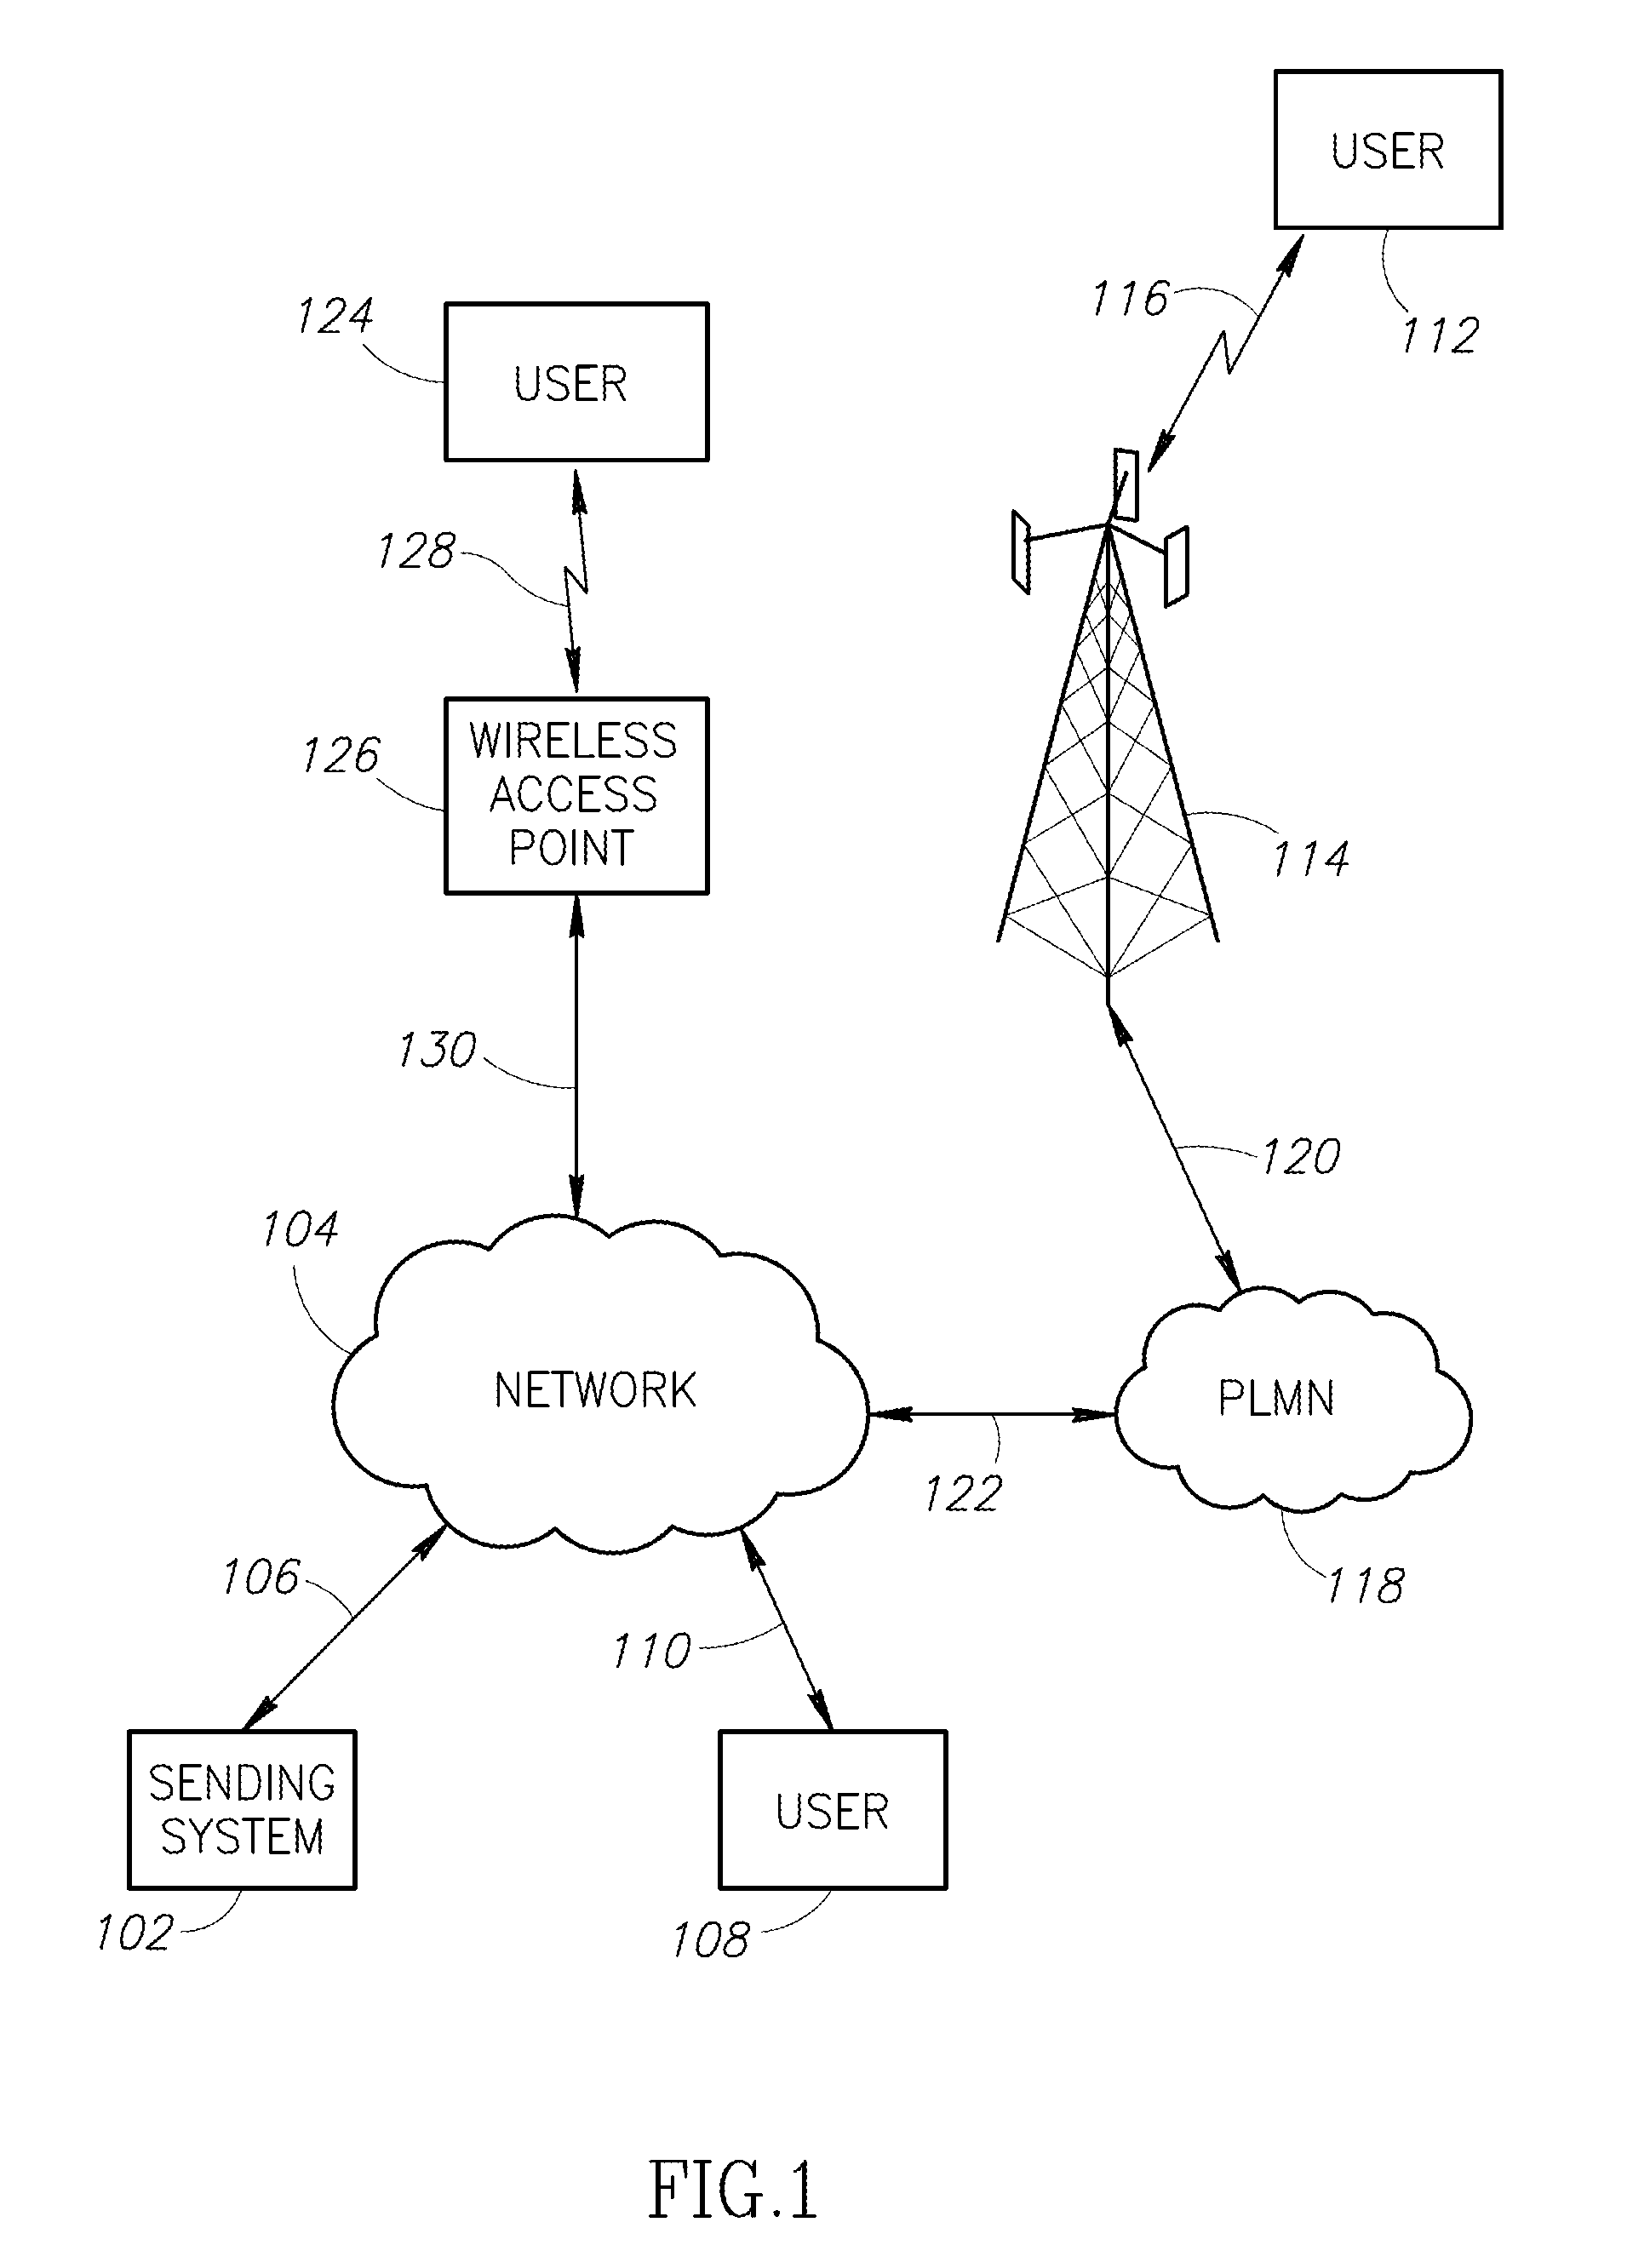 System and method for dynamic service offering based on available resources